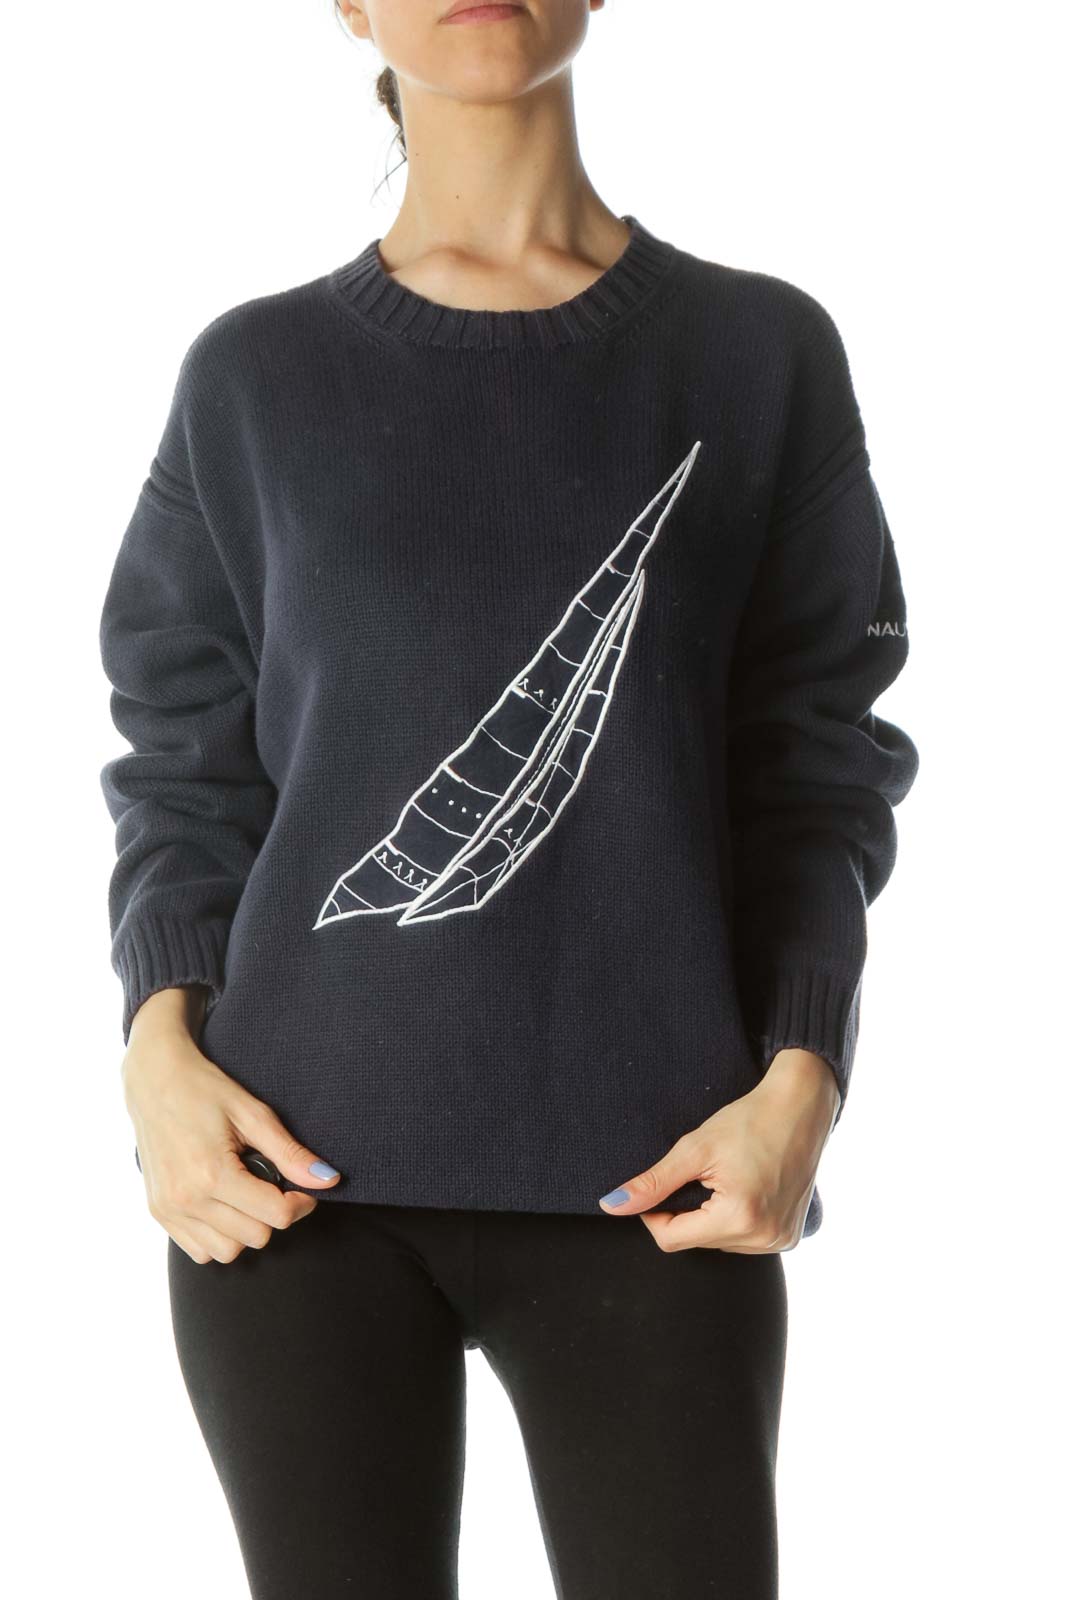 Navy-Blue 100% Cotton Nautical Theme Long-Sleeve Heavy Knit Sweater Front